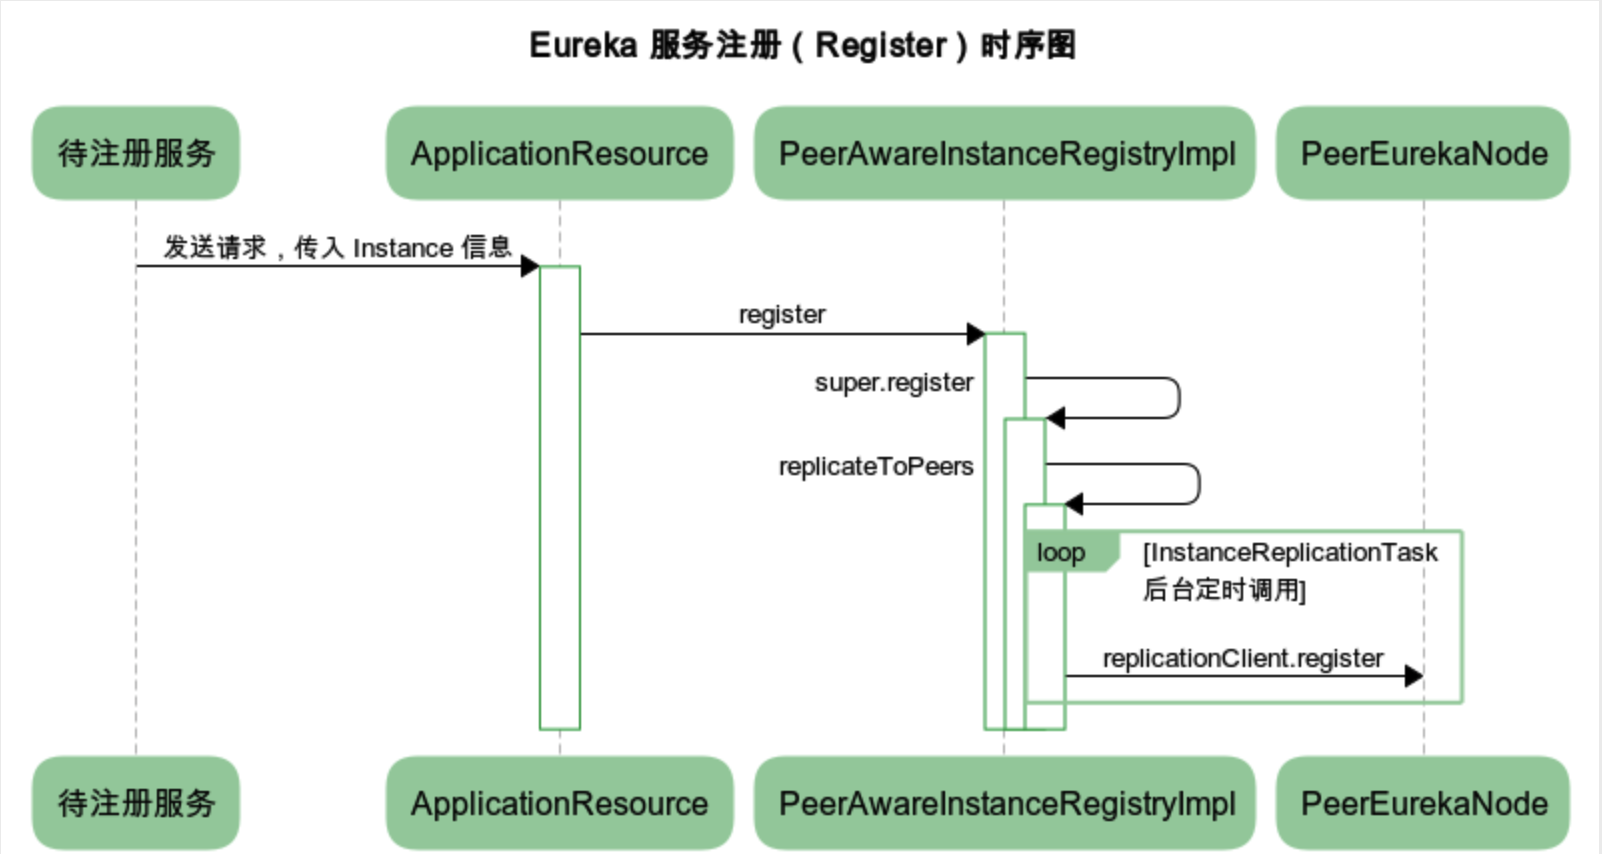 docs/micro-services/images/eureka-server-register-sequence-chart.png